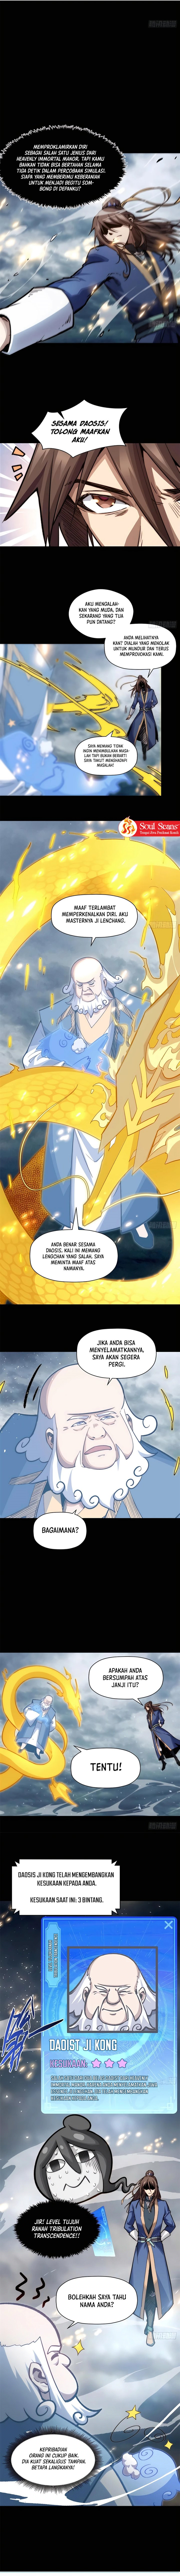 Dilarang COPAS - situs resmi www.mangacanblog.com - Komik top tier providence secretly cultivate for a thousand years 091 - chapter 91 92 Indonesia top tier providence secretly cultivate for a thousand years 091 - chapter 91 Terbaru 9|Baca Manga Komik Indonesia|Mangacan